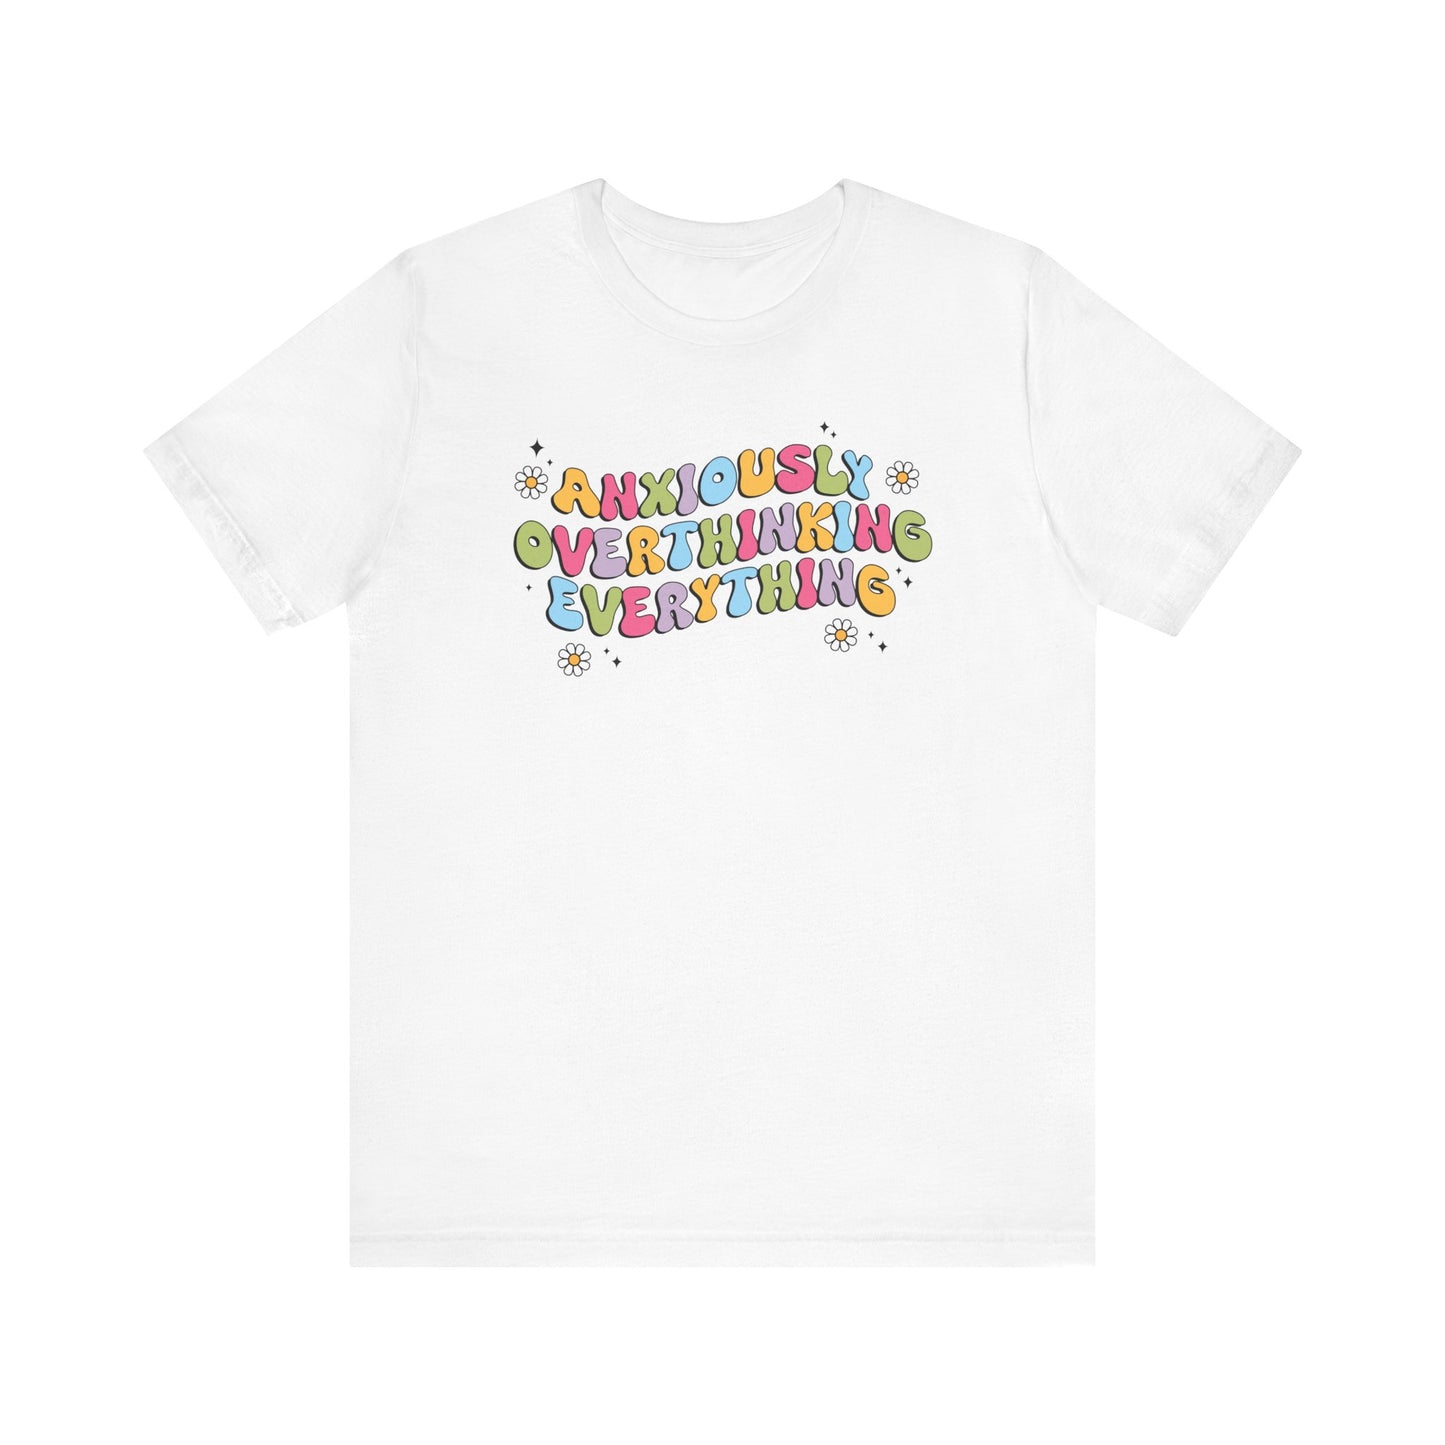 Women's Quirky Quote T-Shirt, Anxiously Overthinking Everything, Colorful Lettering Tee, Gift for Her, Casual Comfortable Top, Unisex Top